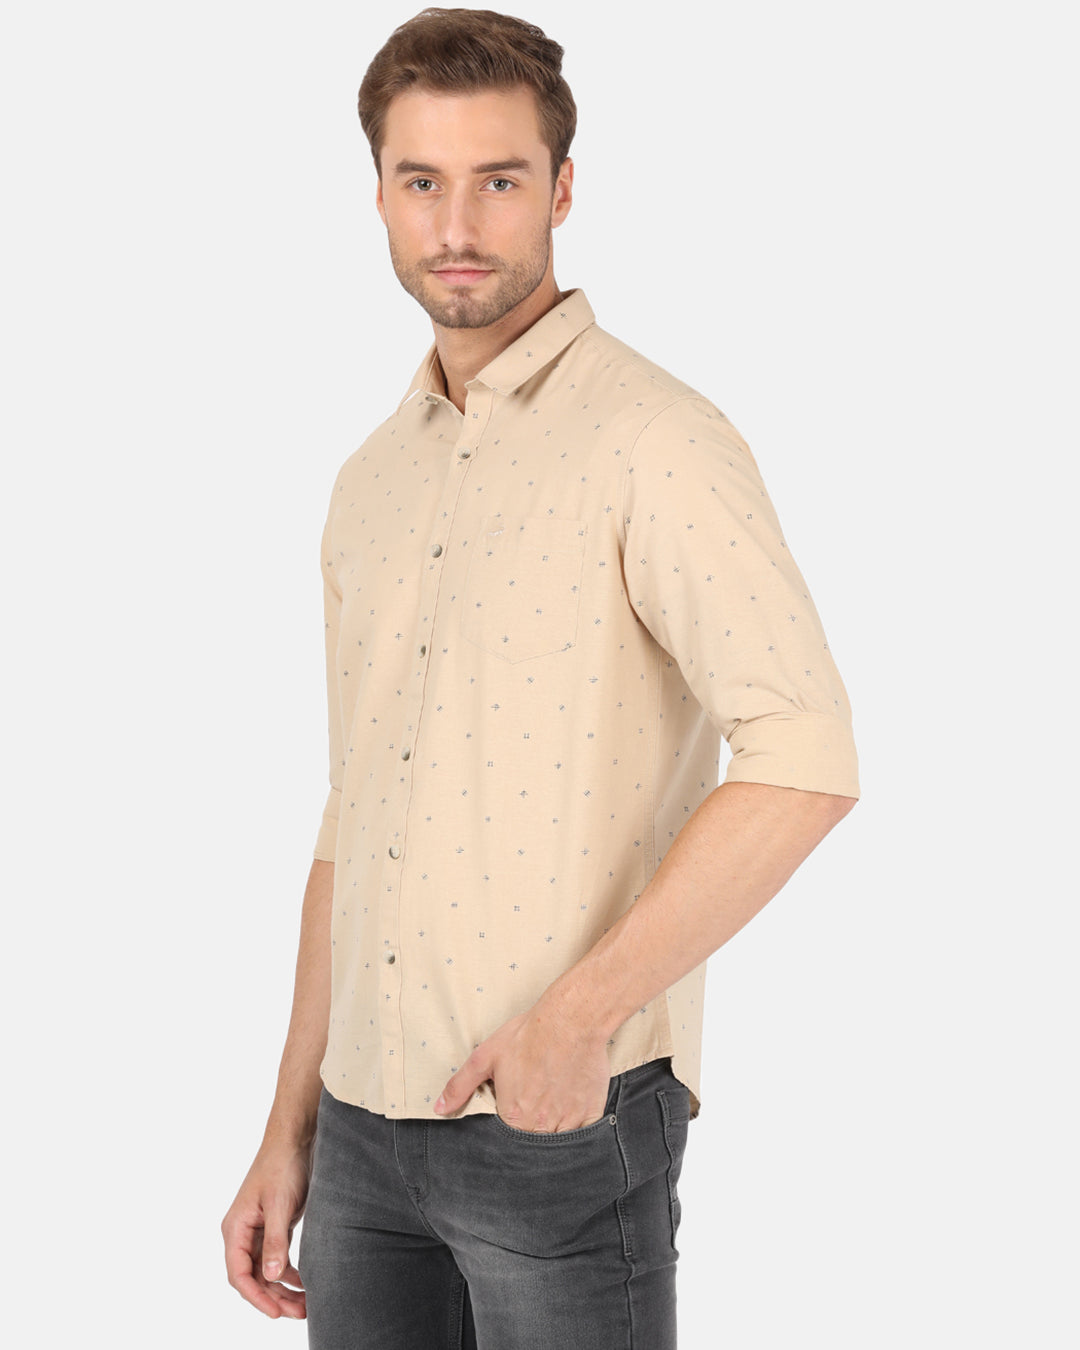 Crocodile Casual Full Sleeve Comfort Fit Printed Yellow with Collar Shirt for Men